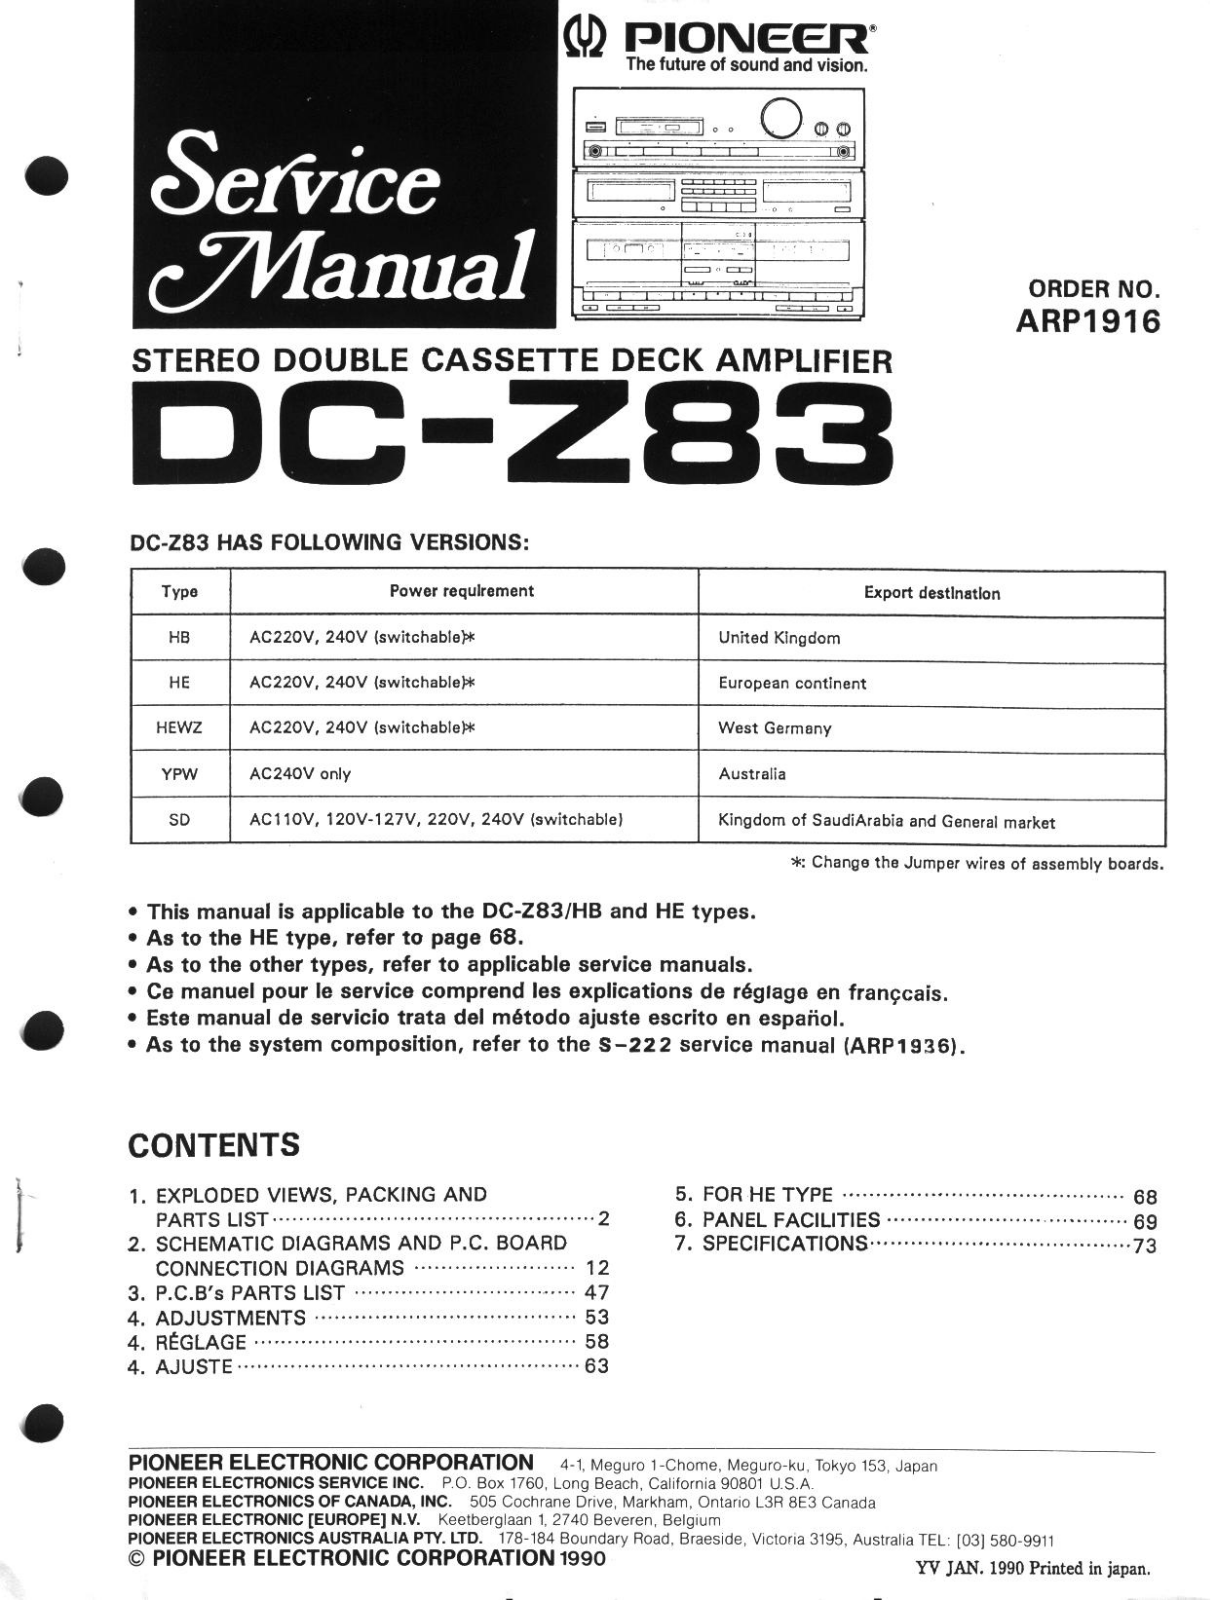 Pioneer DCZ-83 Service manual